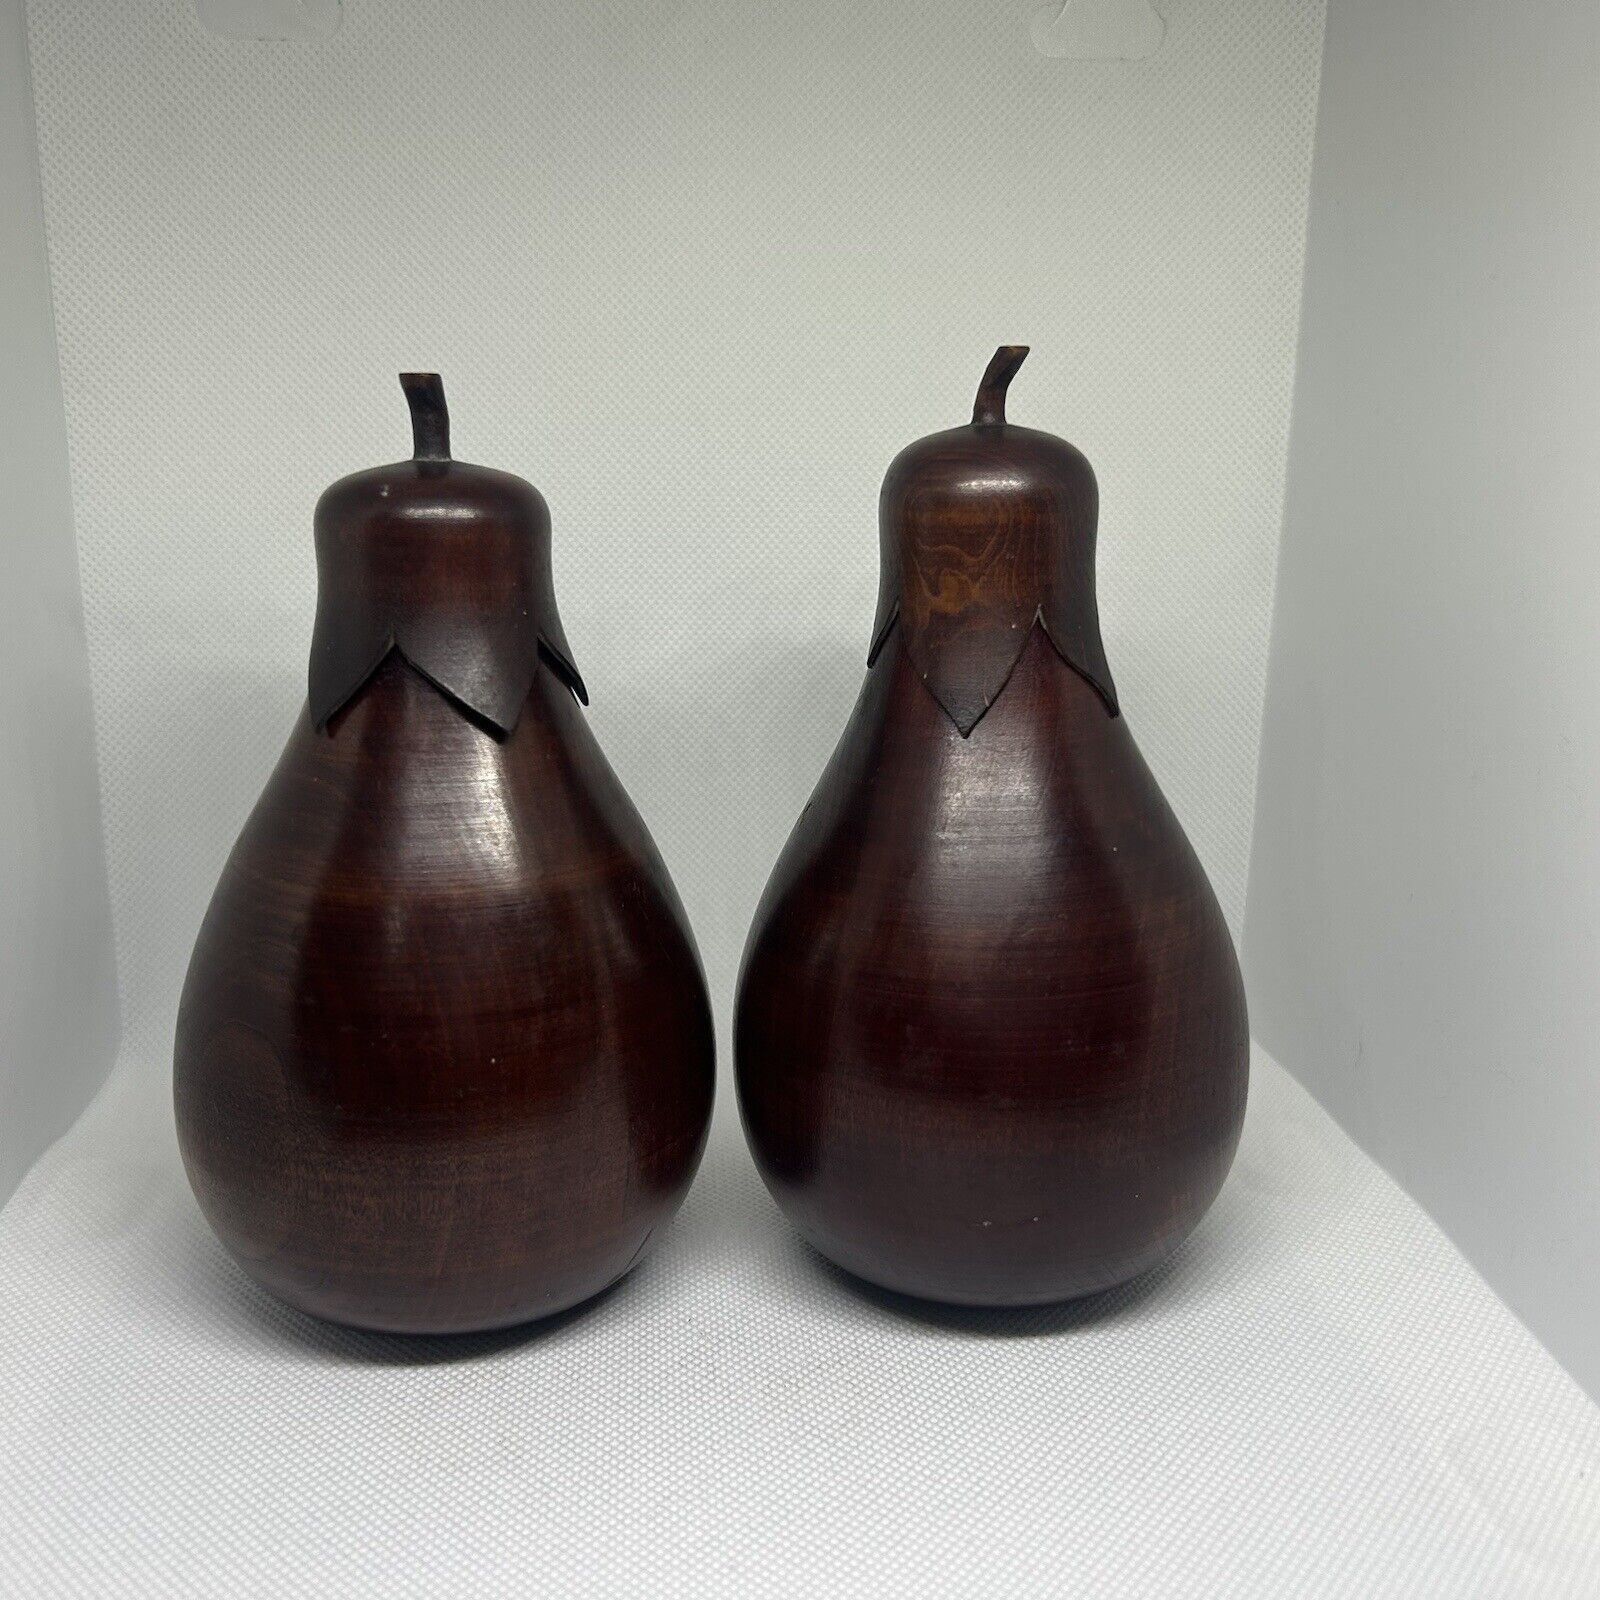 2 Wooden Japanese Tea Caddy Aubergine Eggplant Shape *1 LID IS CHIPPED*